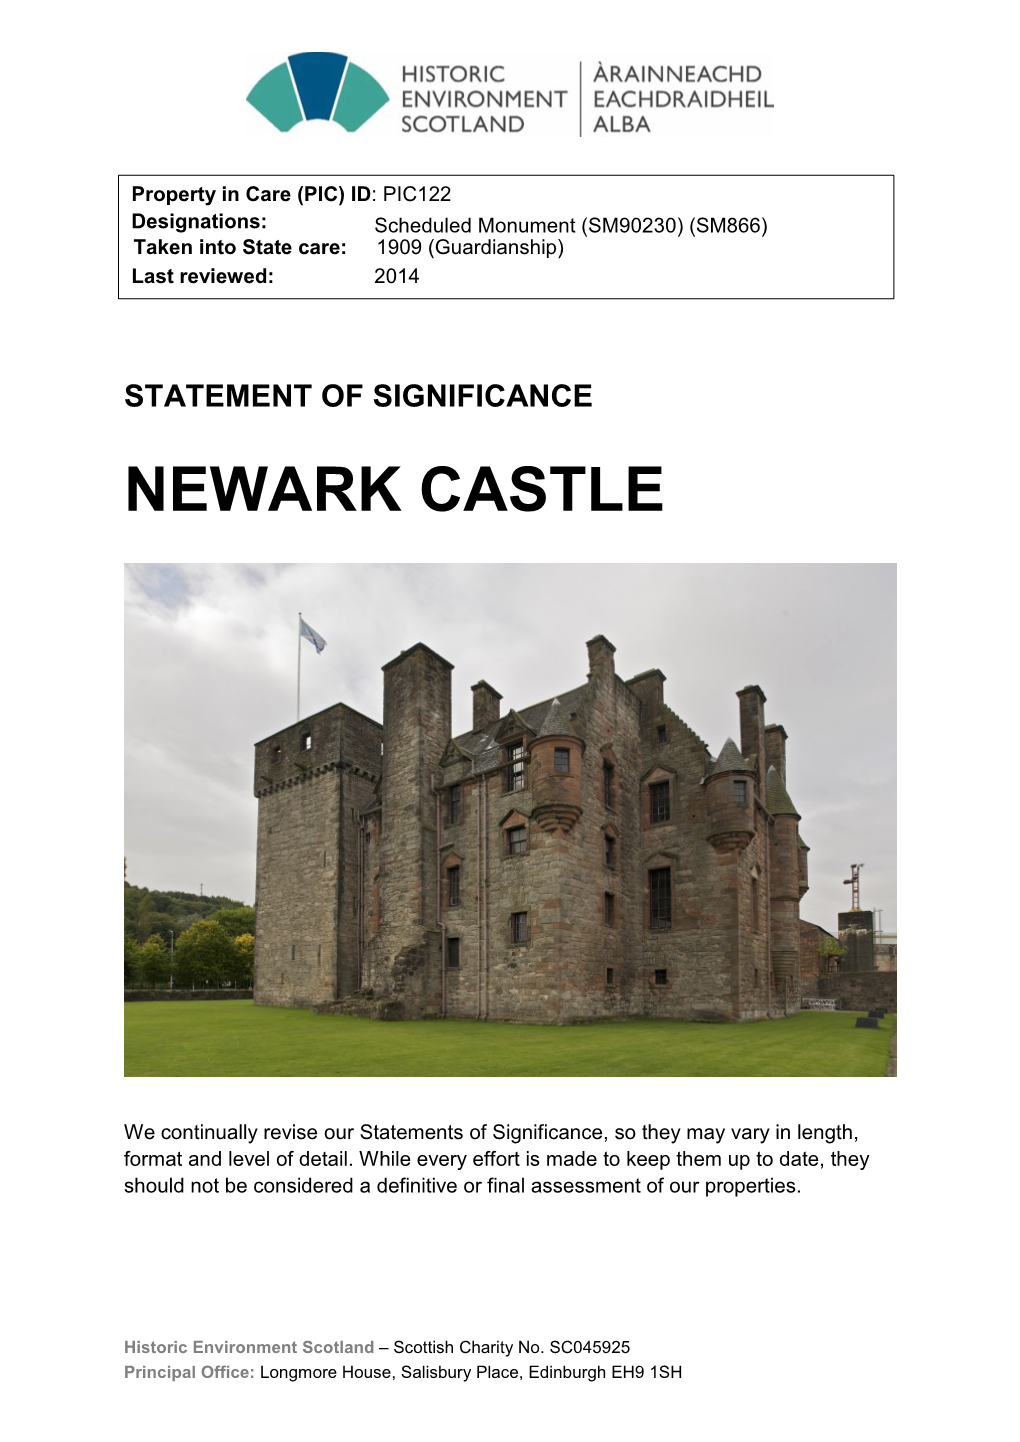 Newark Castle Statement of Significance